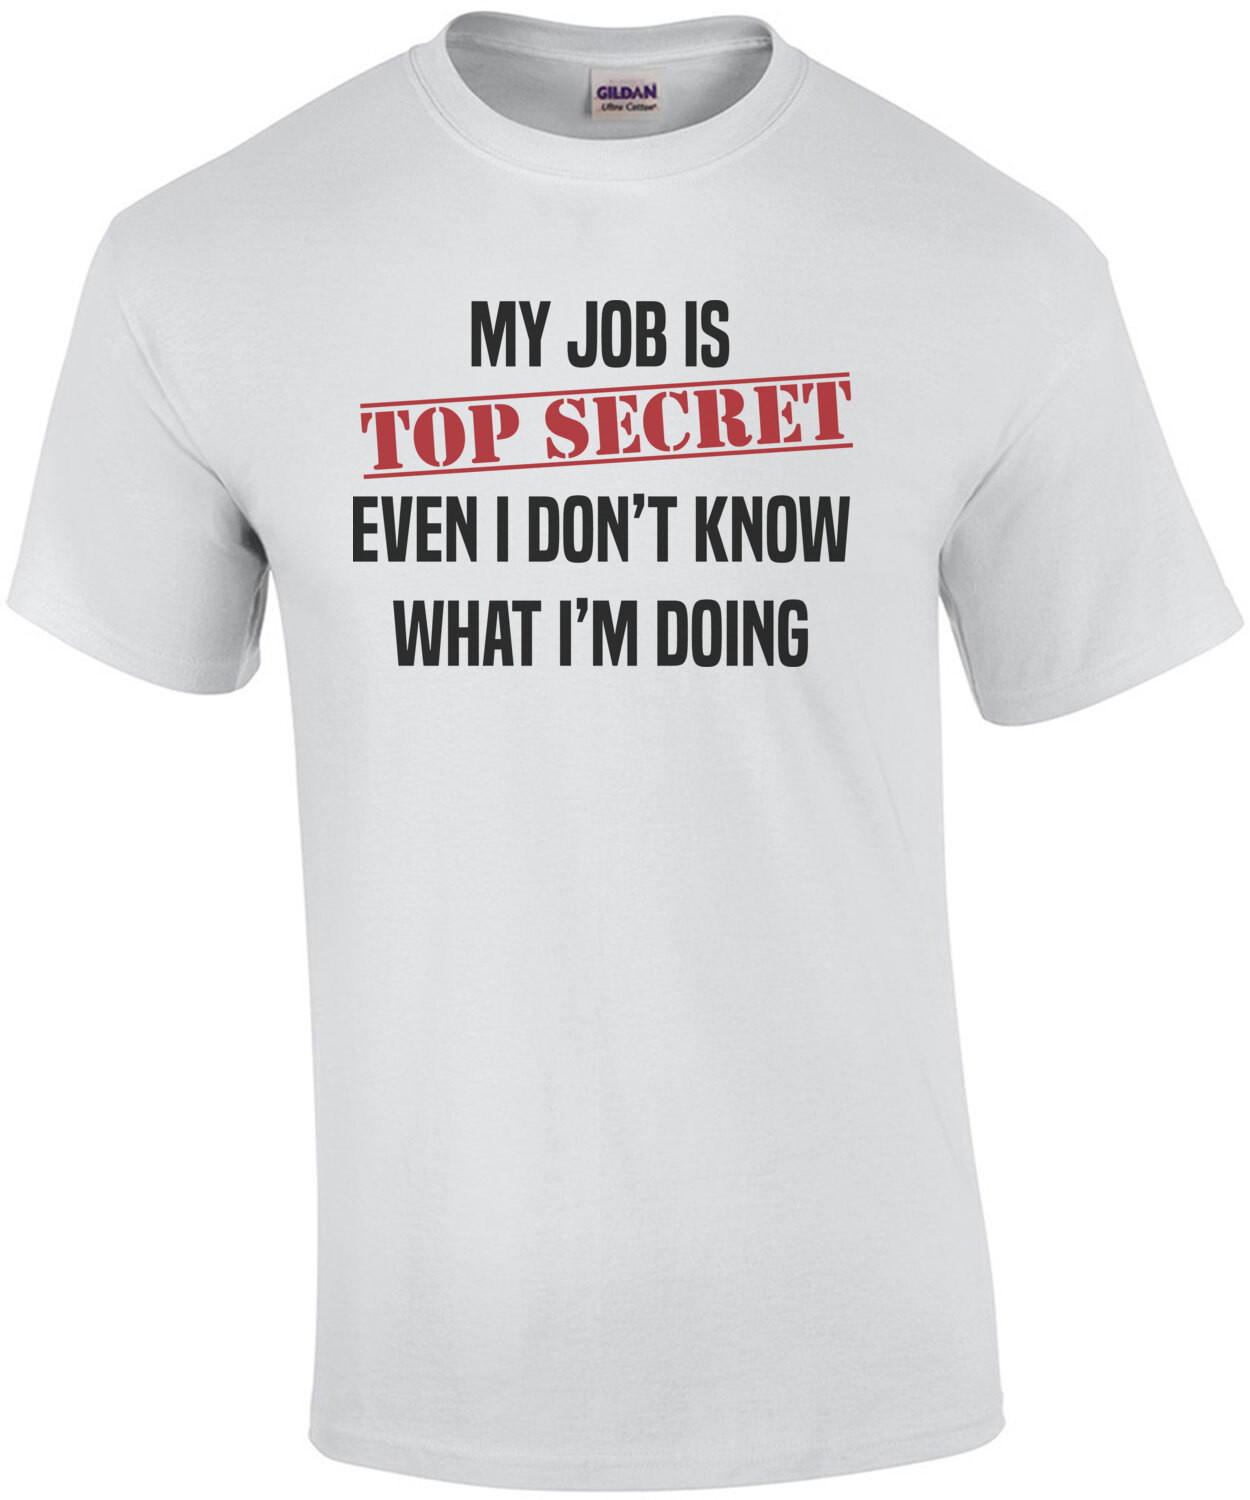 My job is top secret. Even I don't know what I'm doing. Funny work humor - office humor - t-shirt